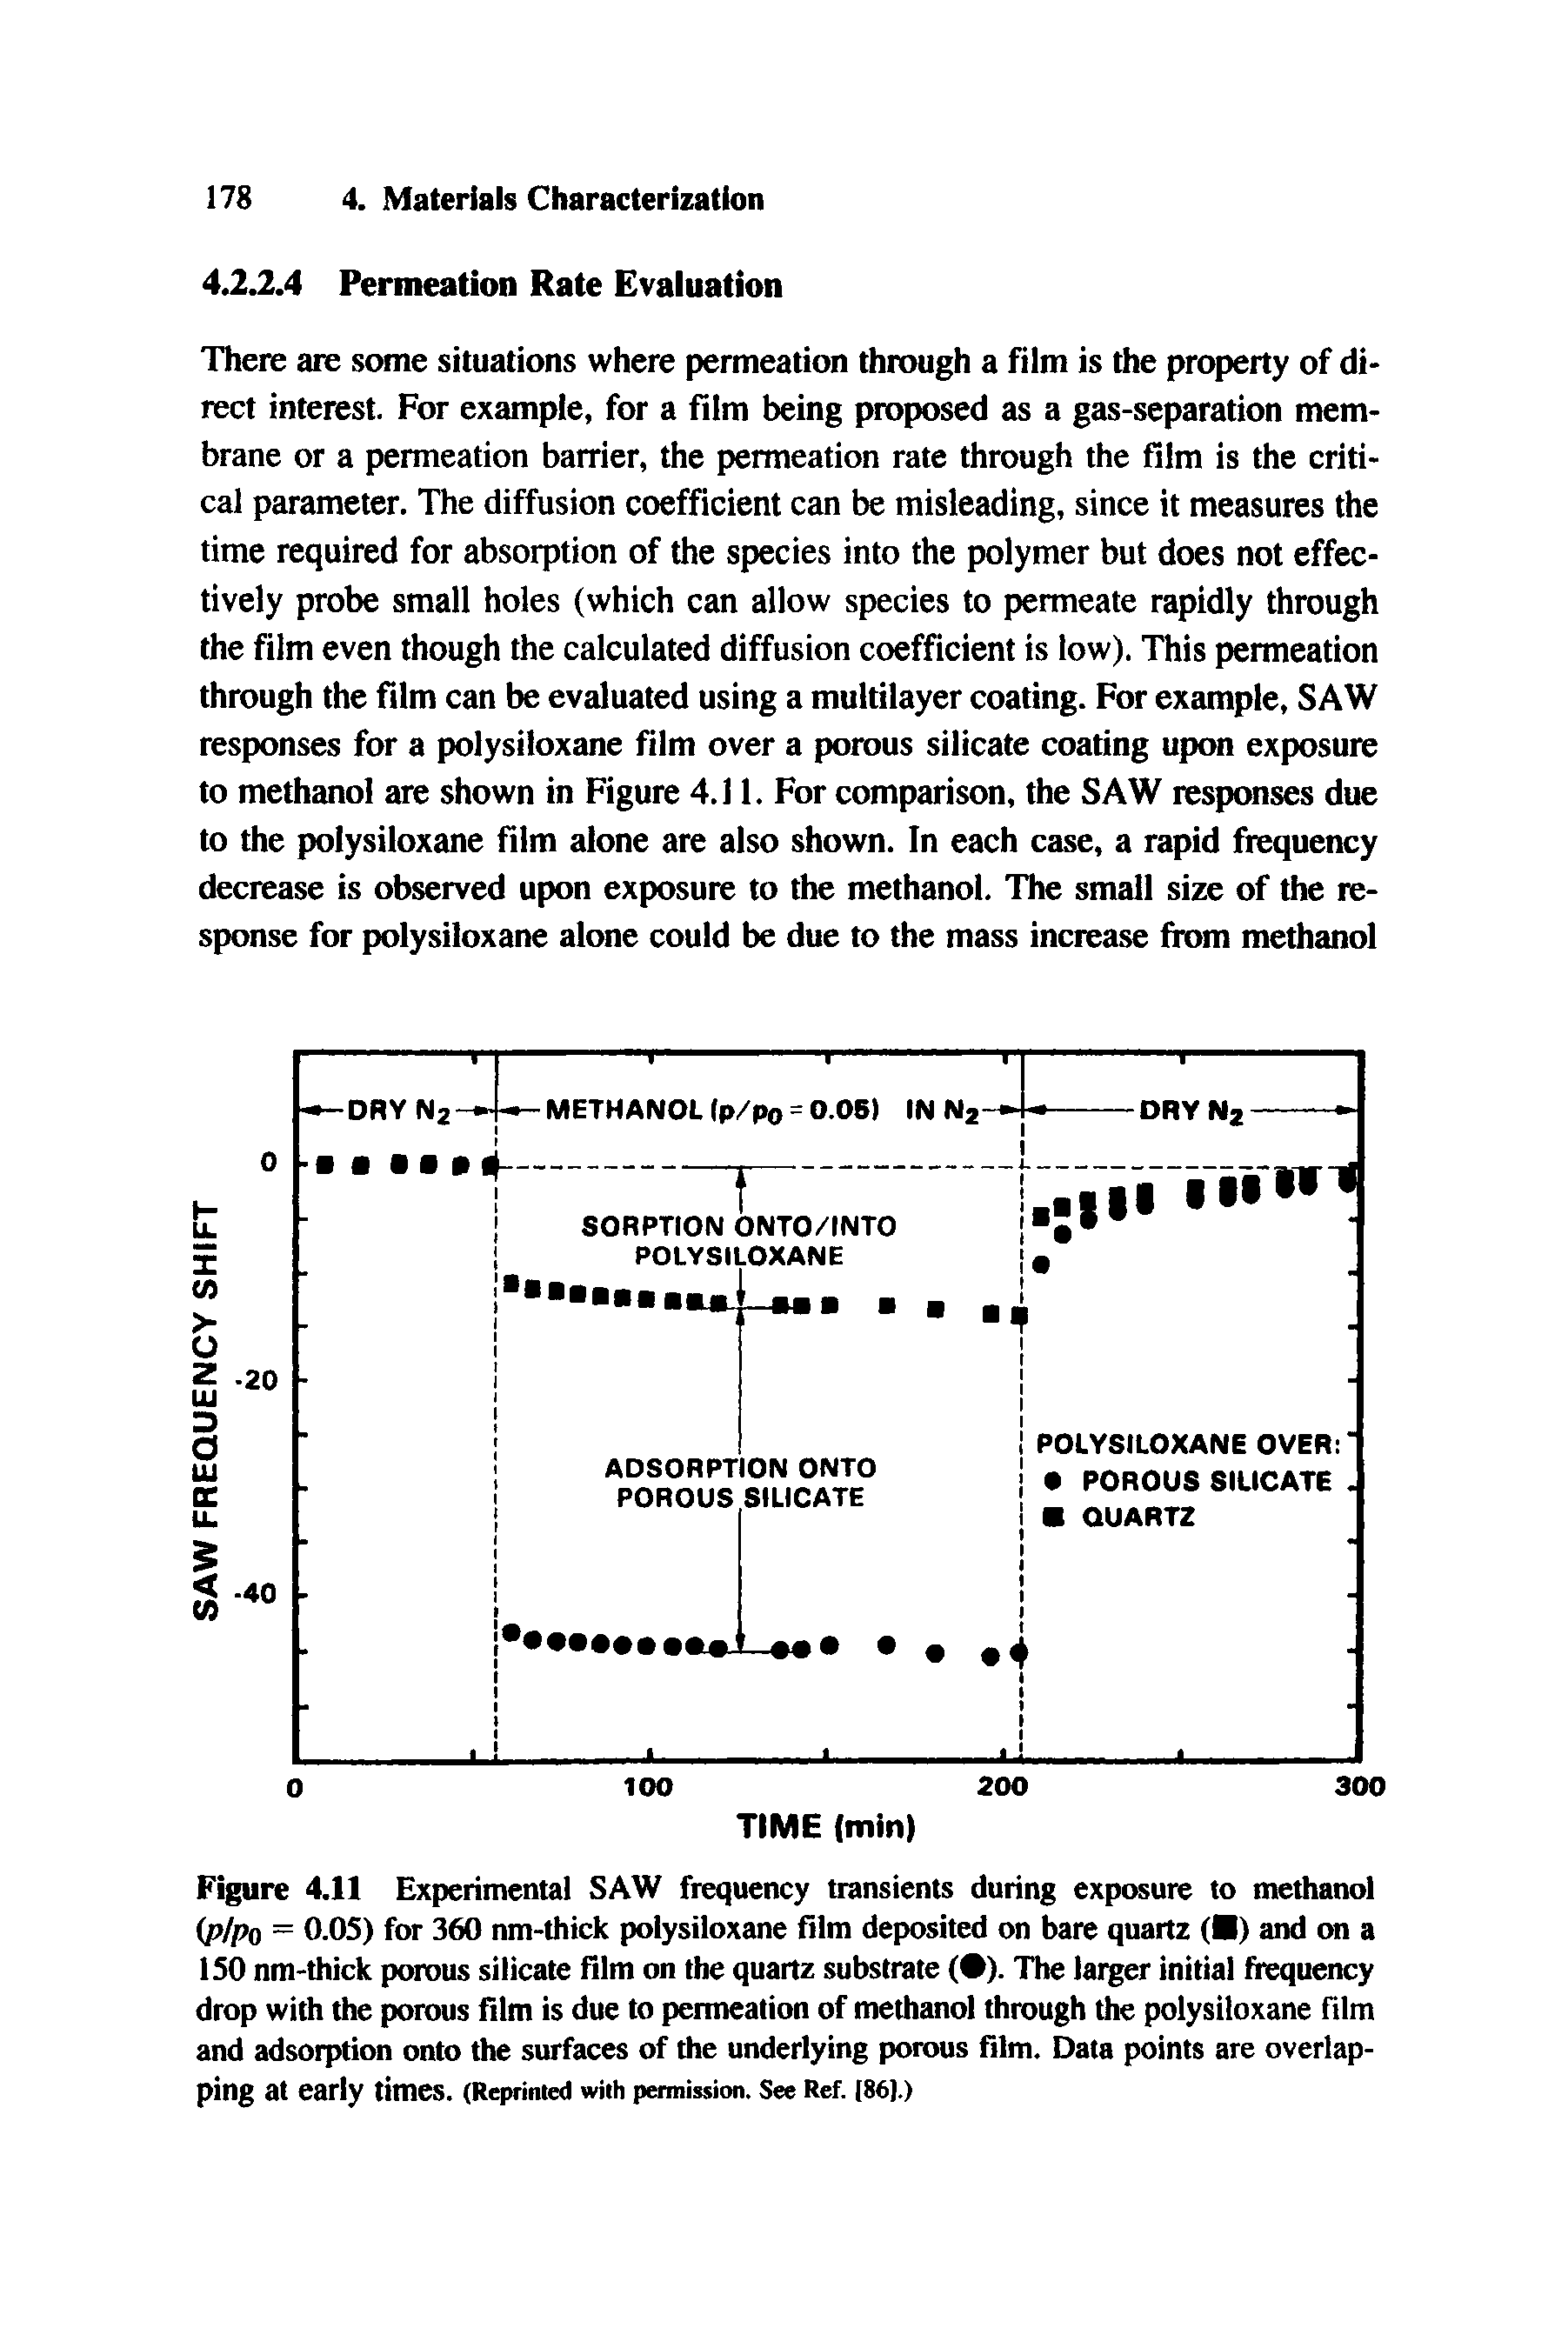 Figure 4.11 Experimental SAW frequency transients during exposure to methanol iplpo = 0.05) for 360 nm-thick polysiloxane film deposited on bare quartz ( ) and on a 150 nm-thick porous silicate film on the quartz substrate ( ). The larger initial fiequency drop with the porous film is due to permeation of methanol through the polysiloxane film and adsorption onto the surfaces of the underlying porous film. Data points are overlapping at early times. (Reprinted with permission. See Ref. (86).)...